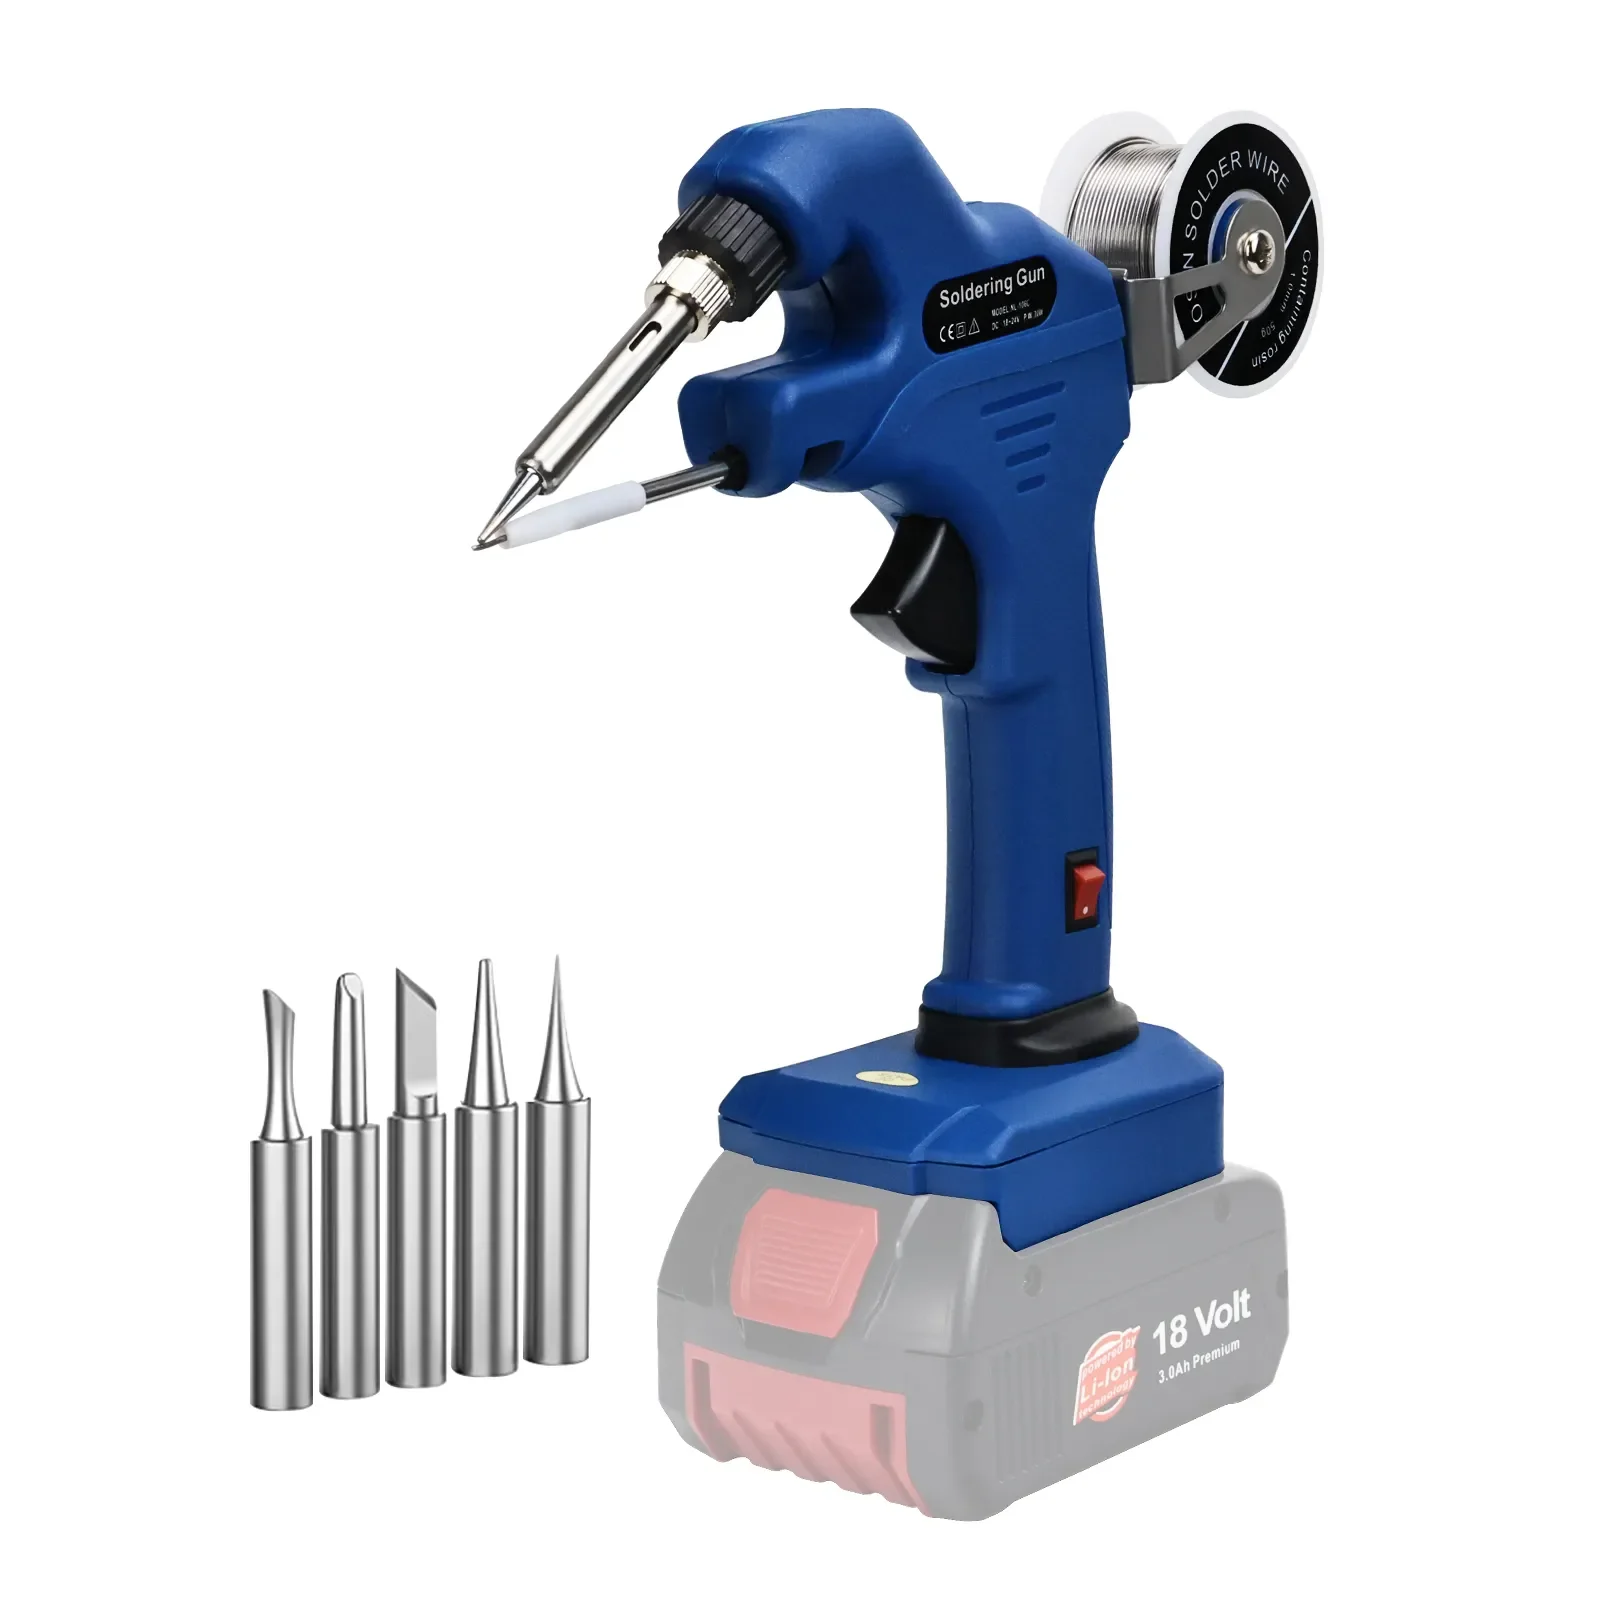 Cordless Solder Gun Electric Soldering Iron Kit with Ceramic Heater Portable Fast Welding Tools for Bosch 18V Li-ion Battery